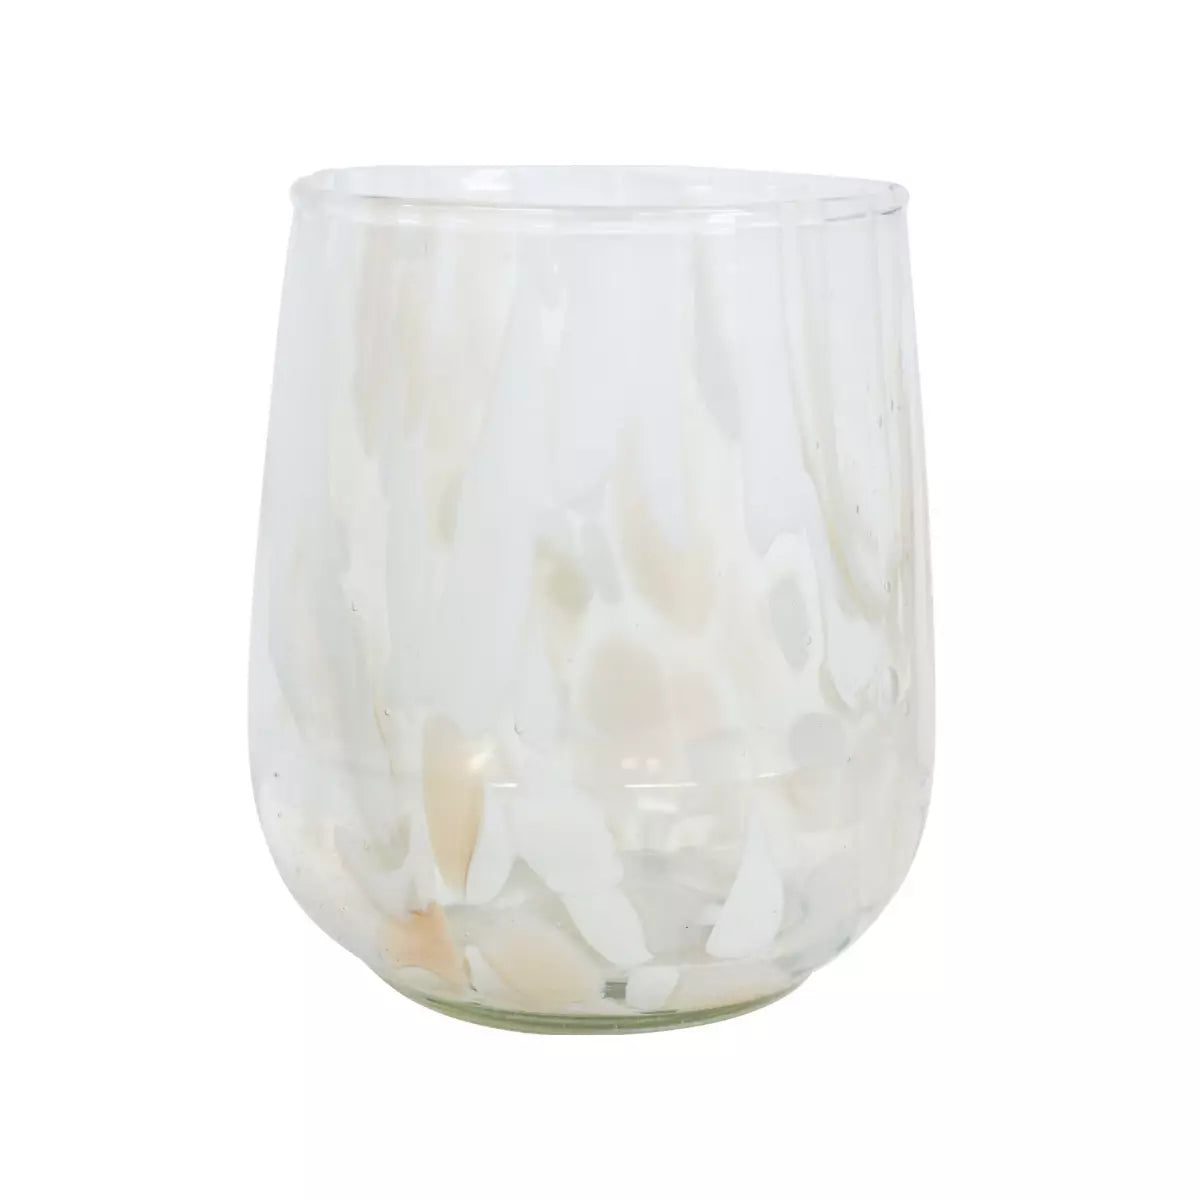 A Candle Holder - White Tiger glass with a pattern on it, perfect for home decor. (Brand: LaVida)